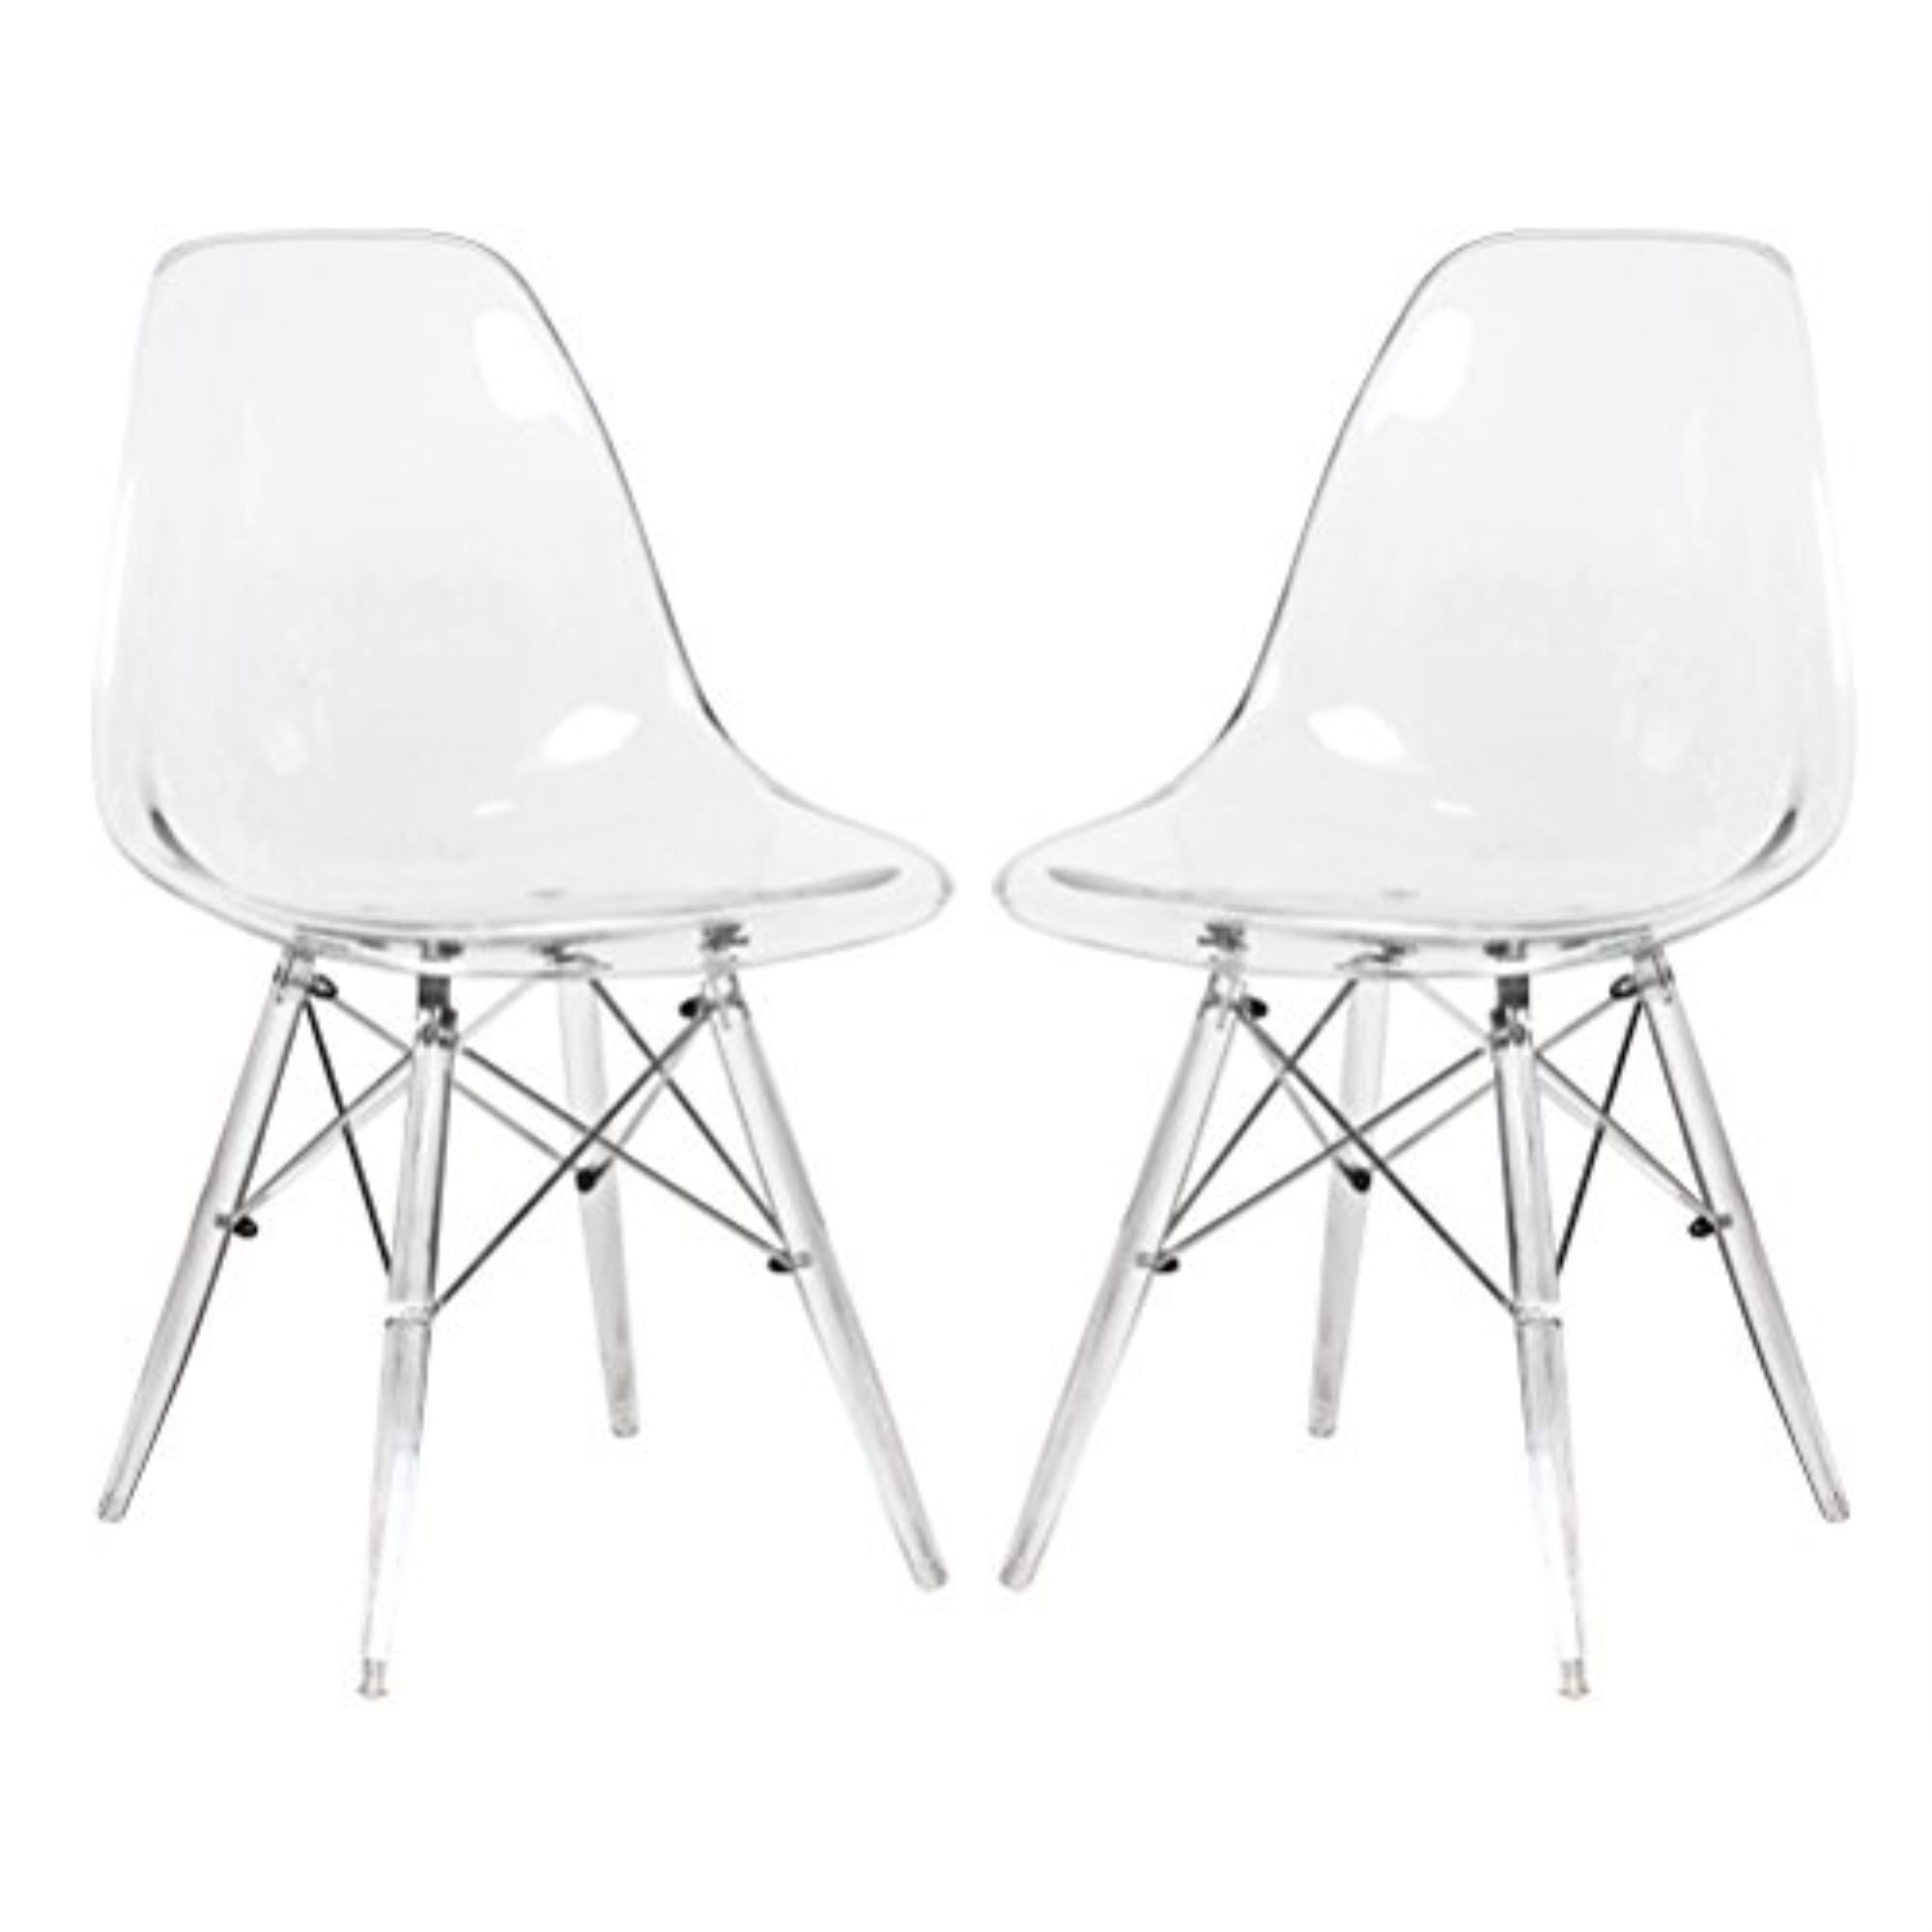 set of 2   Dining      Chairs  ghost clear  Eiffel   retro 